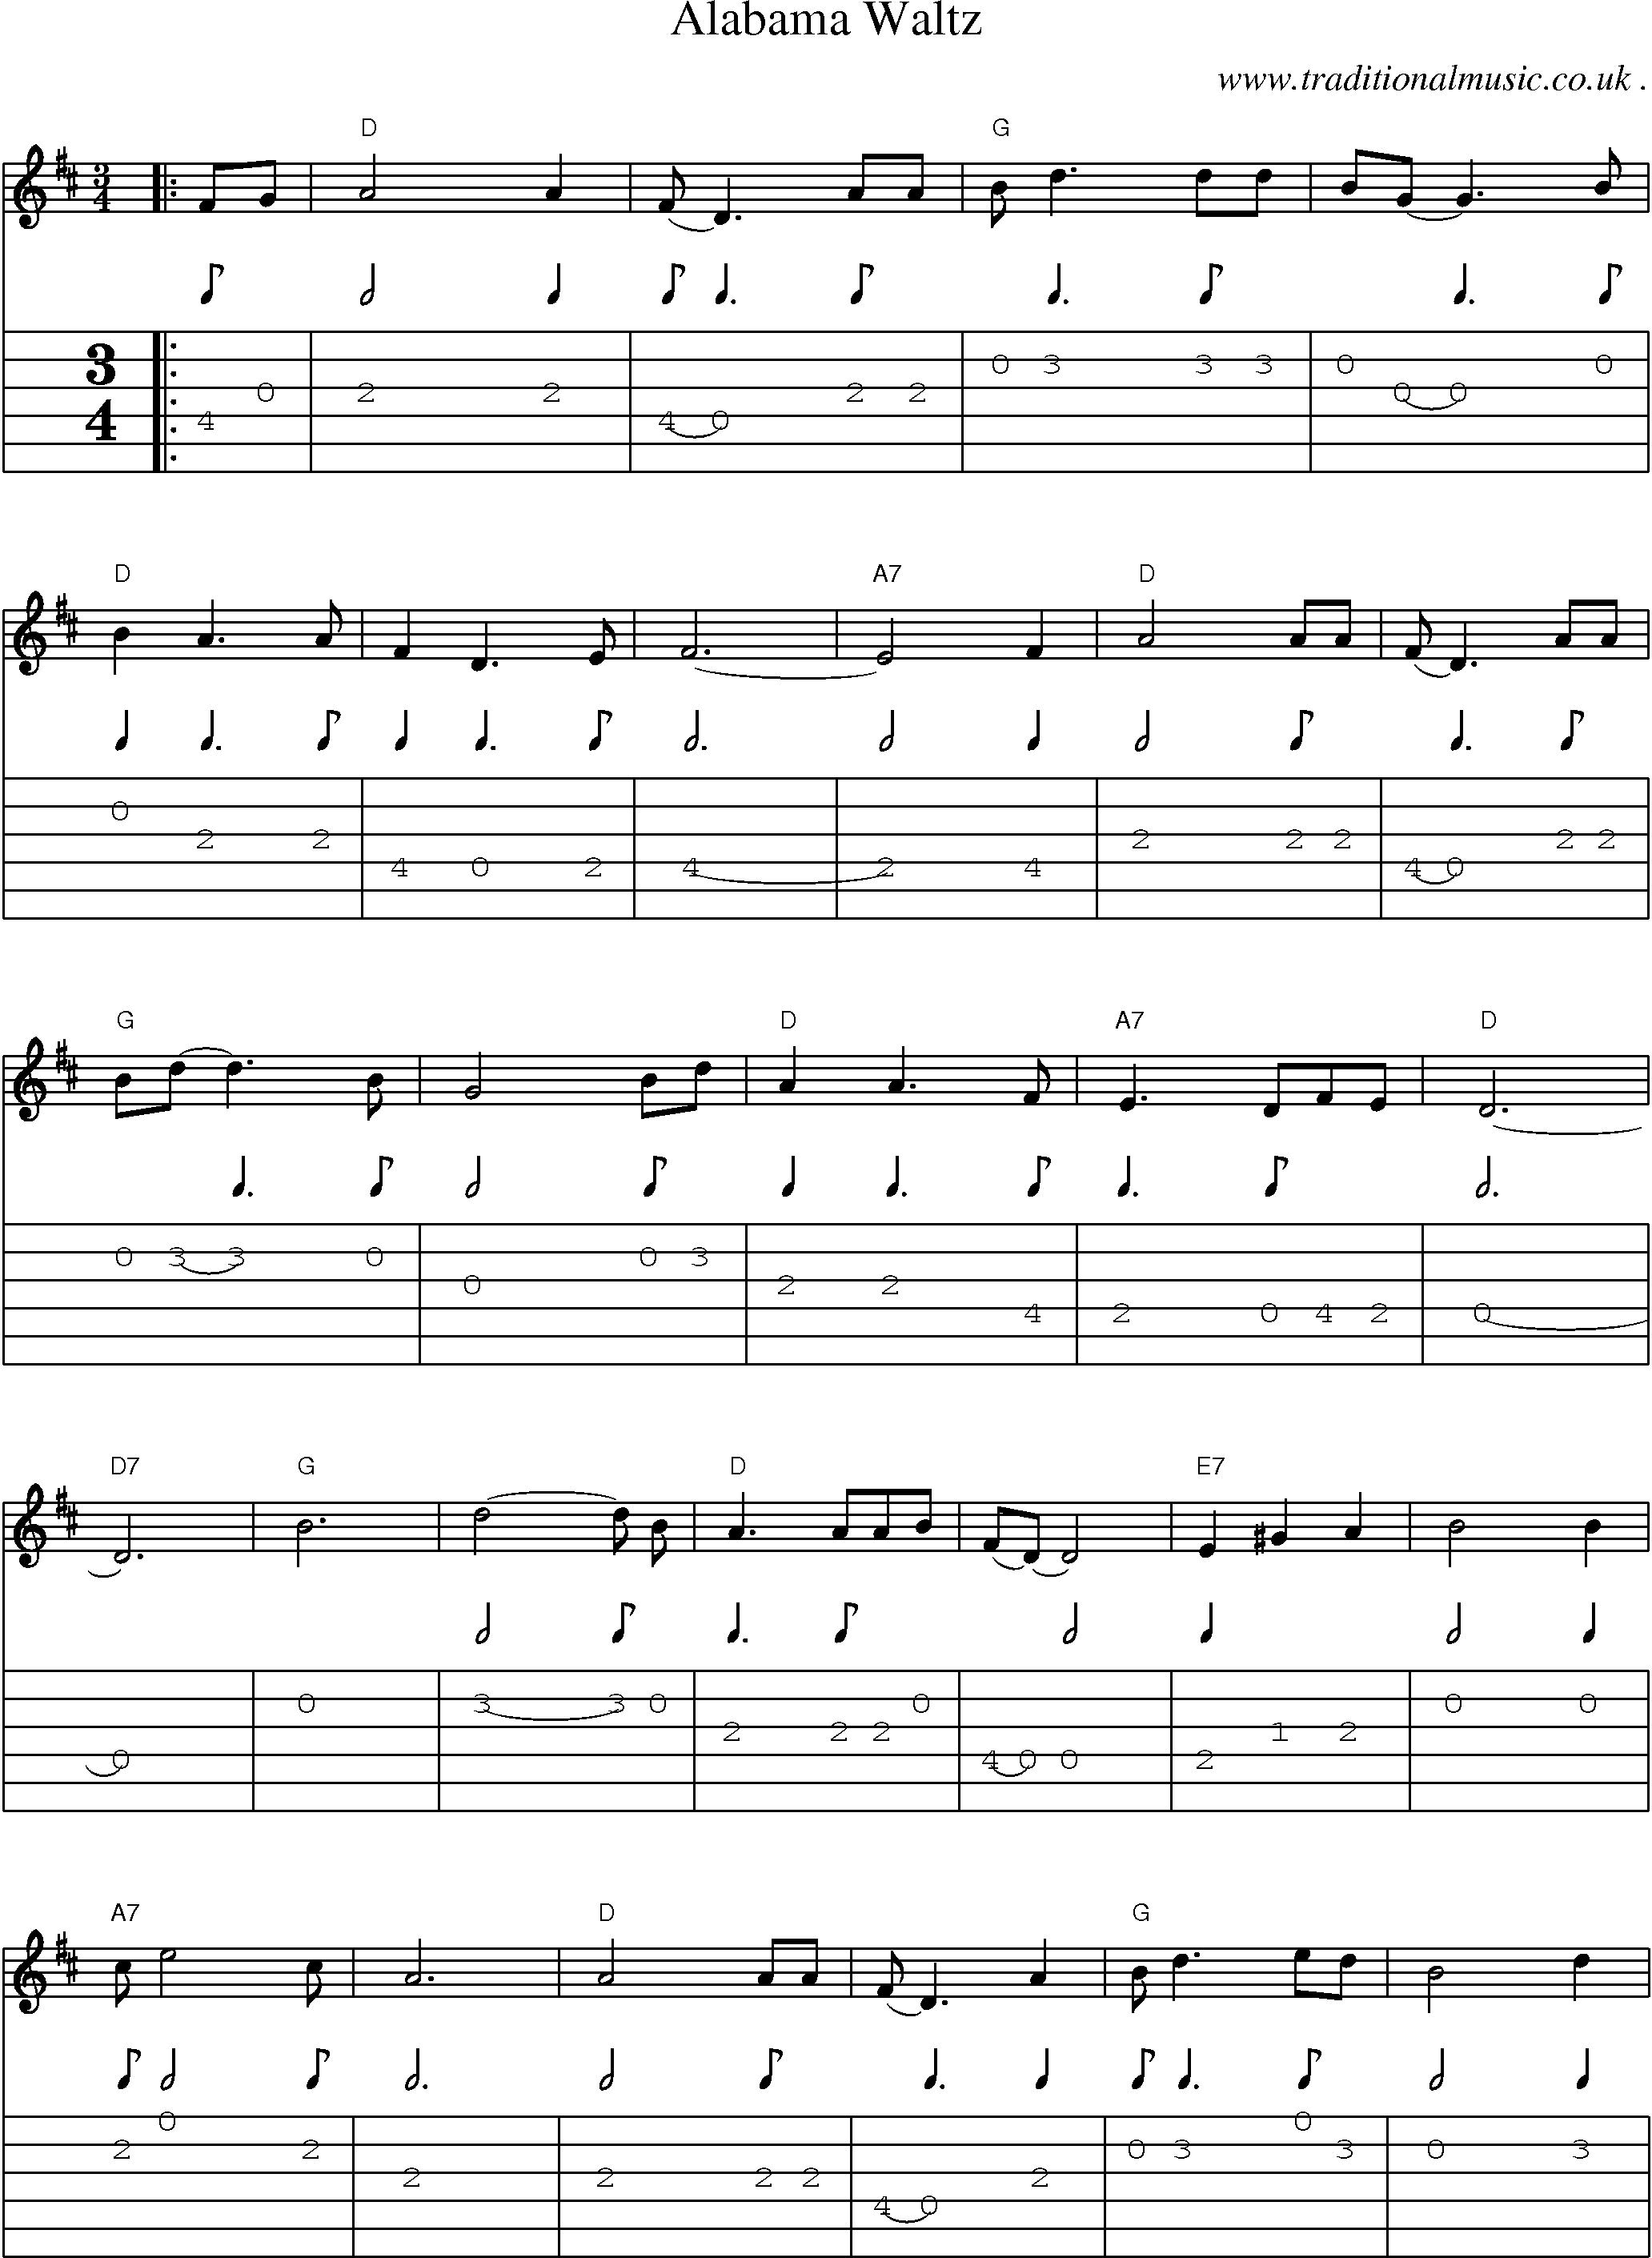 Music Score and Guitar Tabs for Alabama Waltz